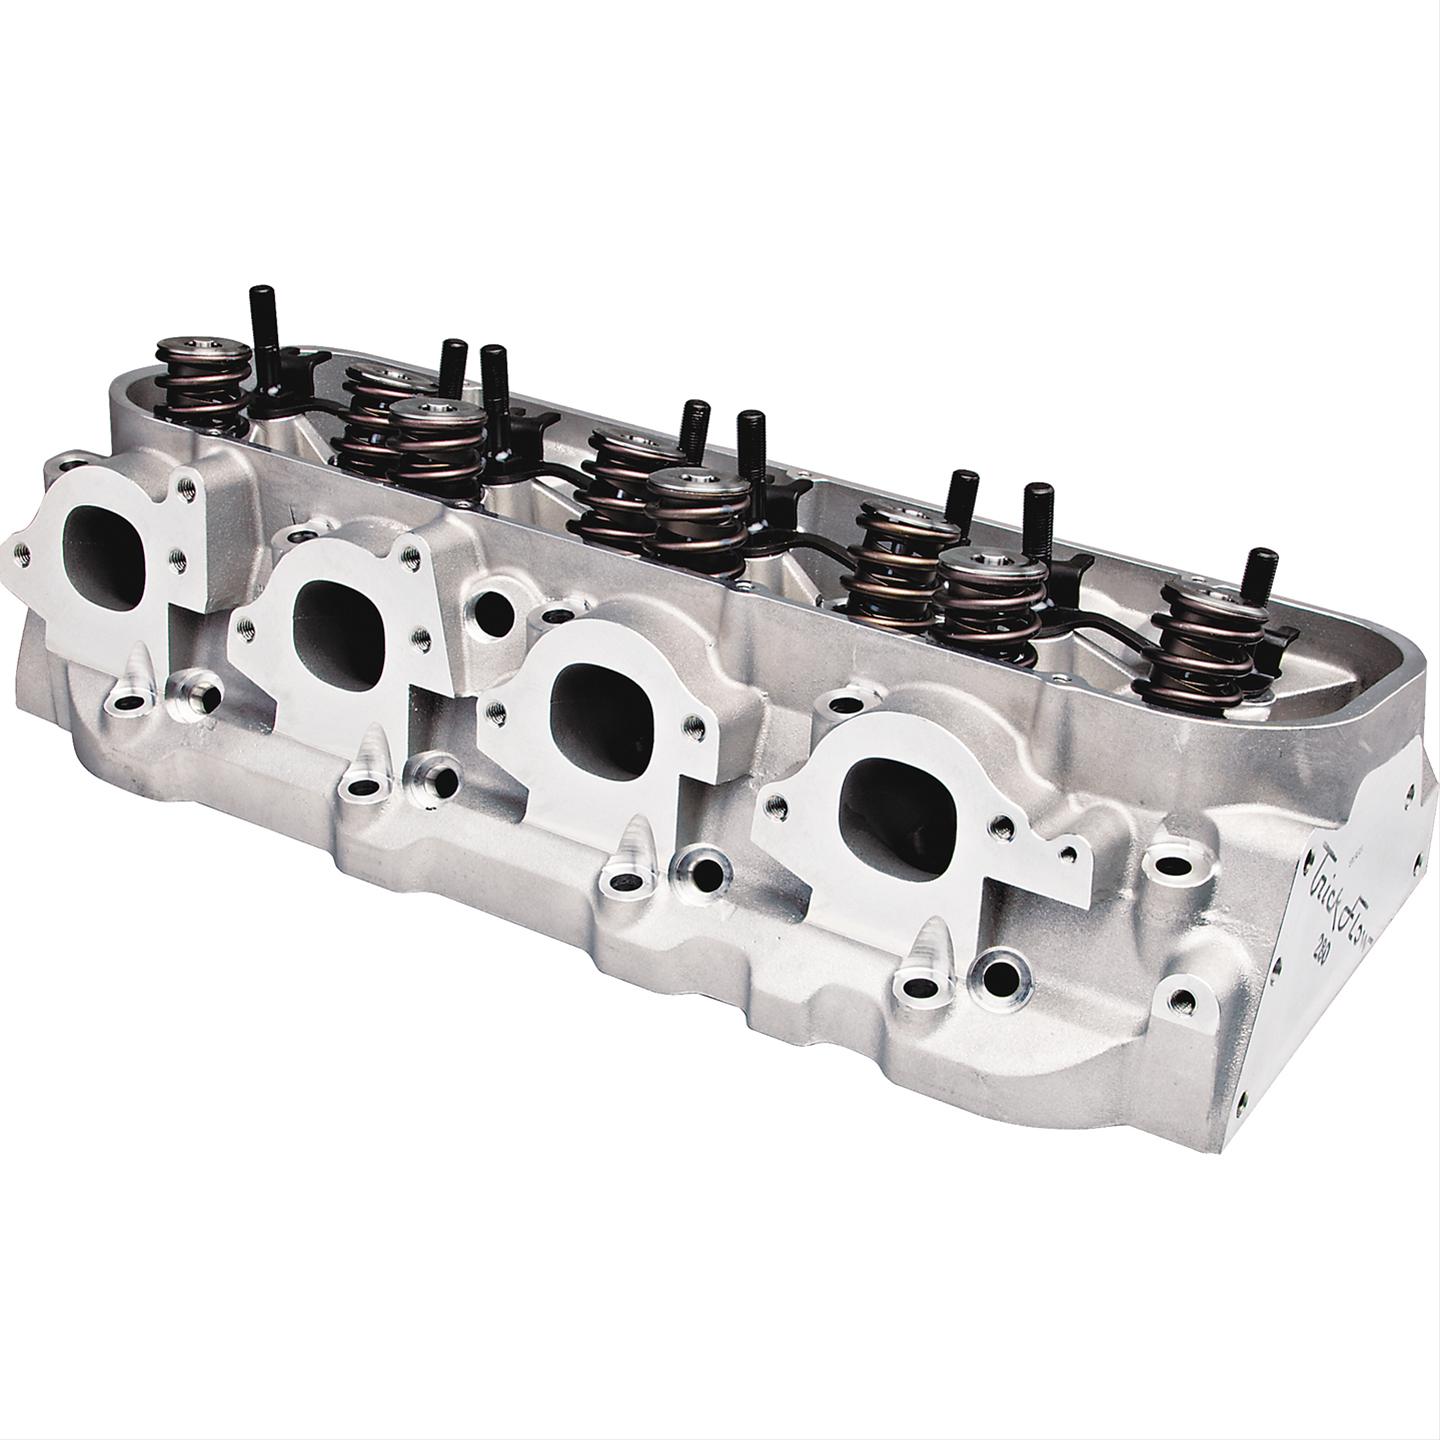 Trick Flow® PowerOval® 280 Cylinder Heads for Big Block 